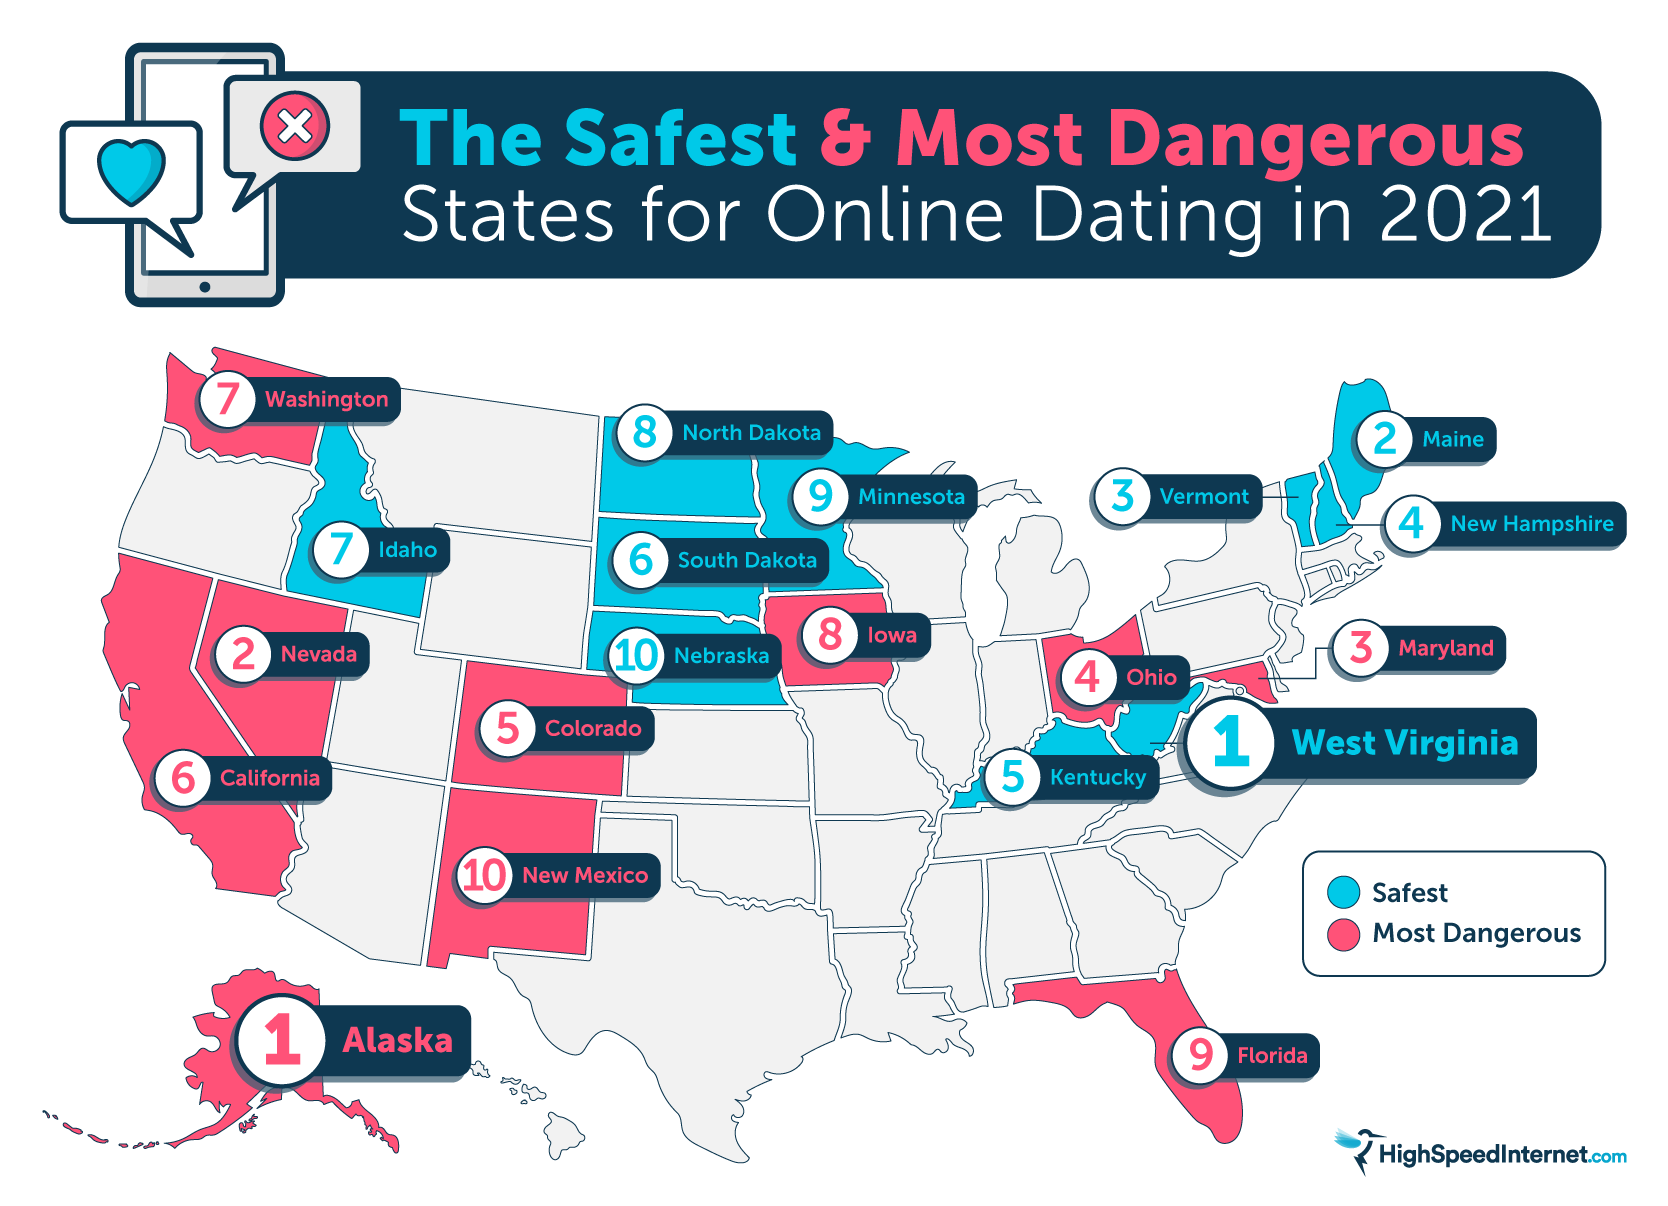 Safest & Most Dangerous States for Online Dating